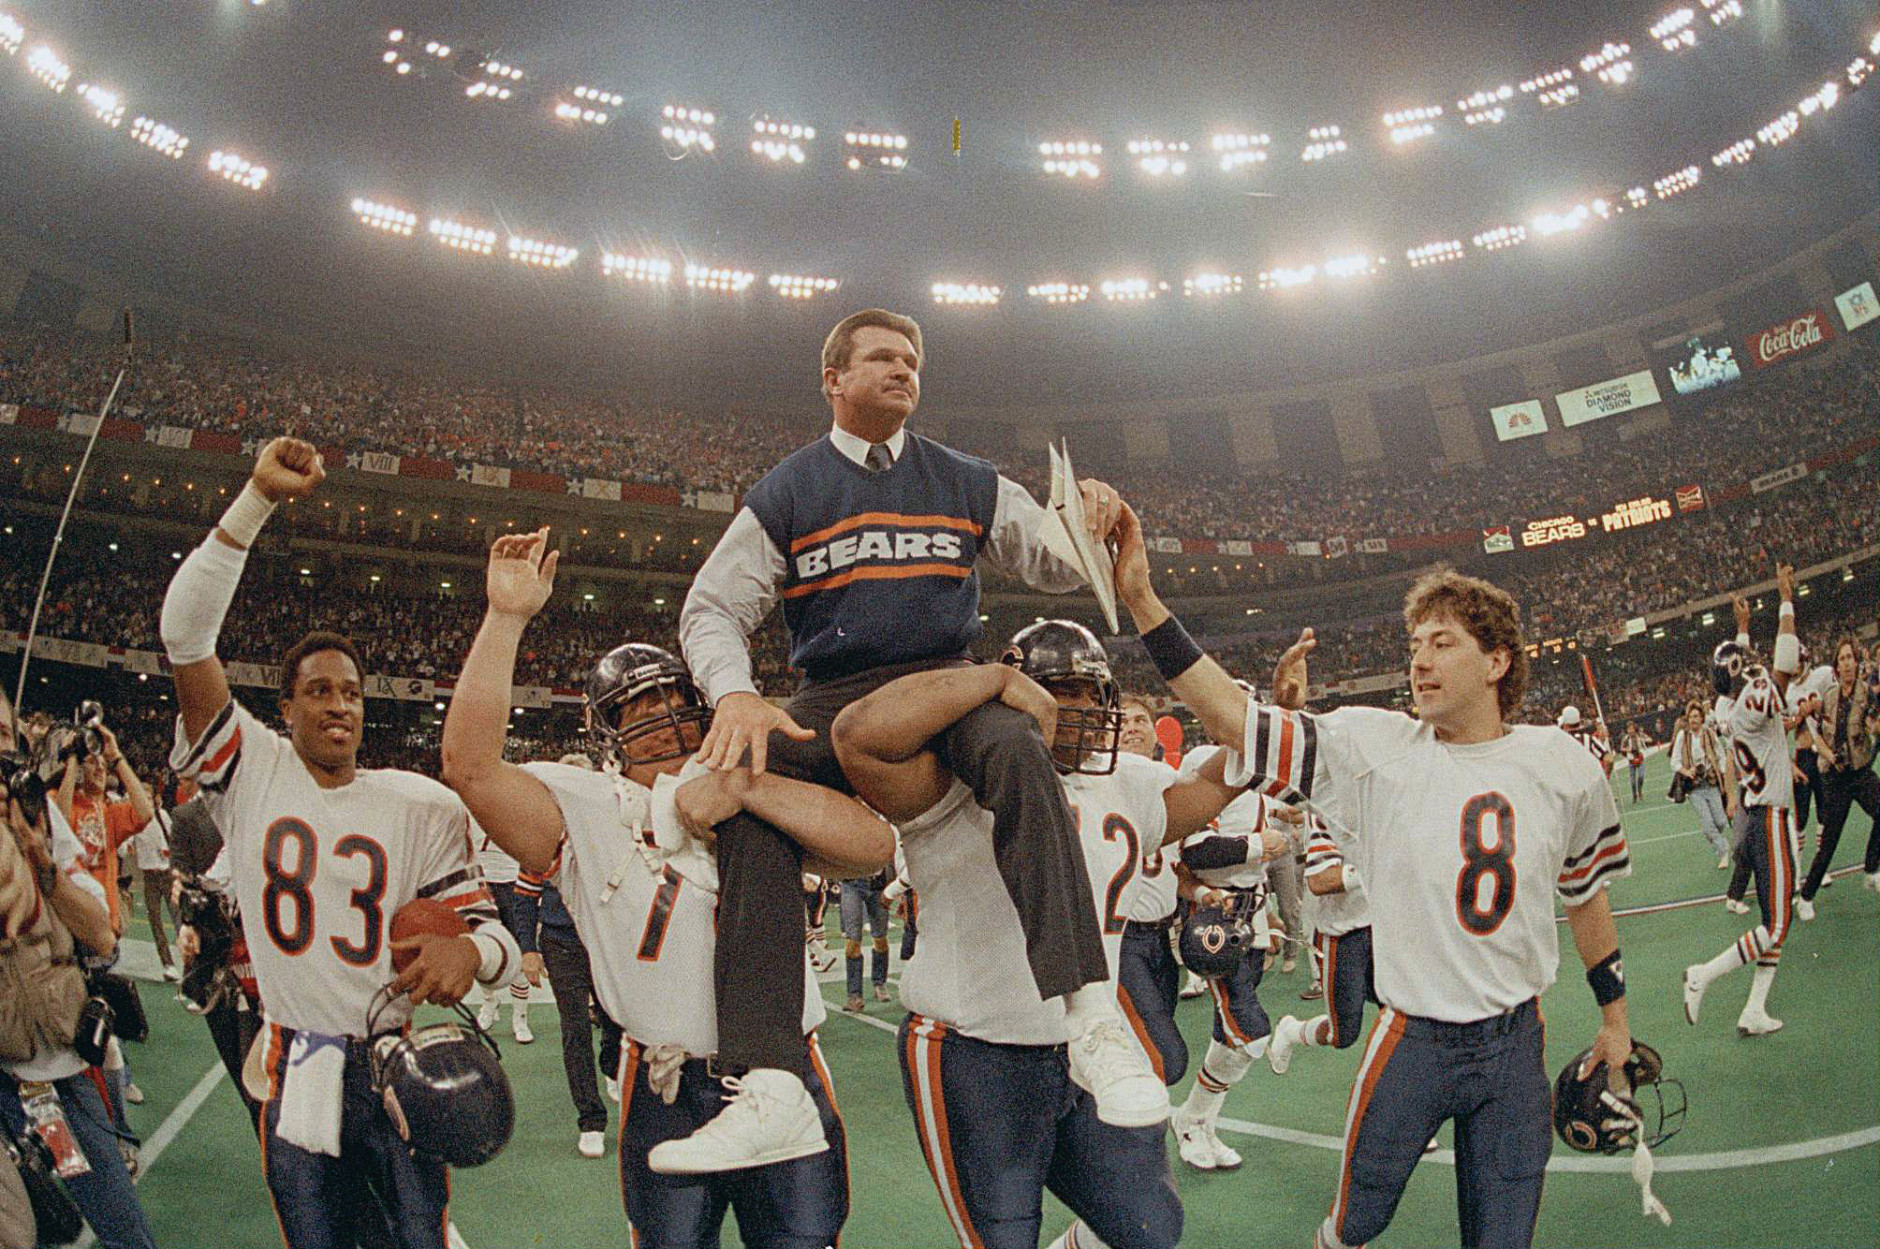 Super Bowl XX

The Chicago Bears carry coach Mike Ditka off the field after their 46-10 win over the Patriots in Super Bowl XX, New England's first appearance in the big game. (AP Photo/Phil Sandlin)